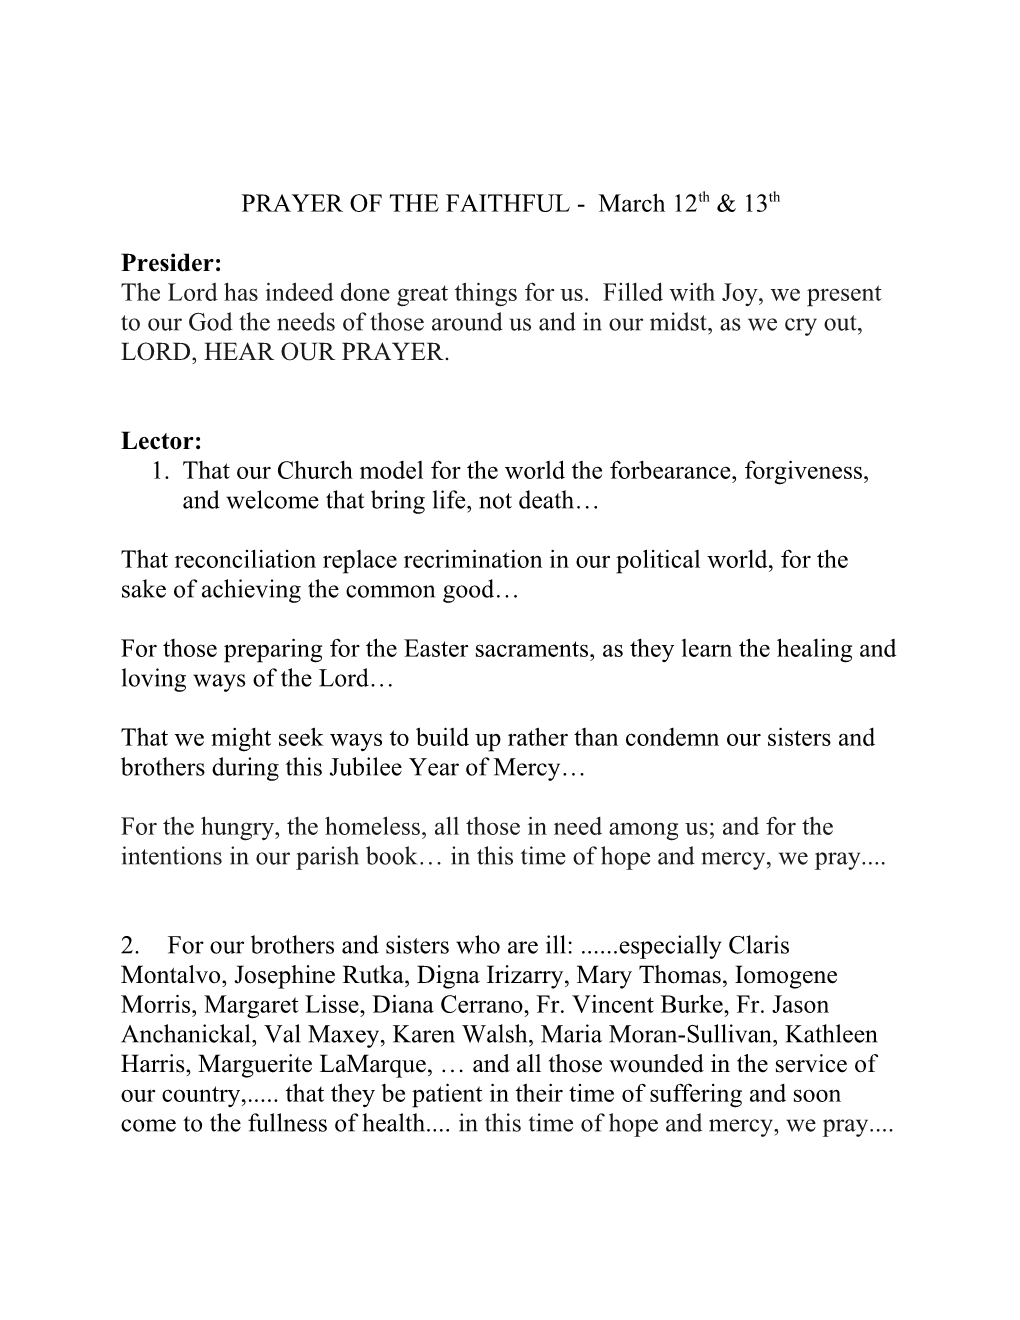 PRAYER of the FAITHFUL - March 12Th13th